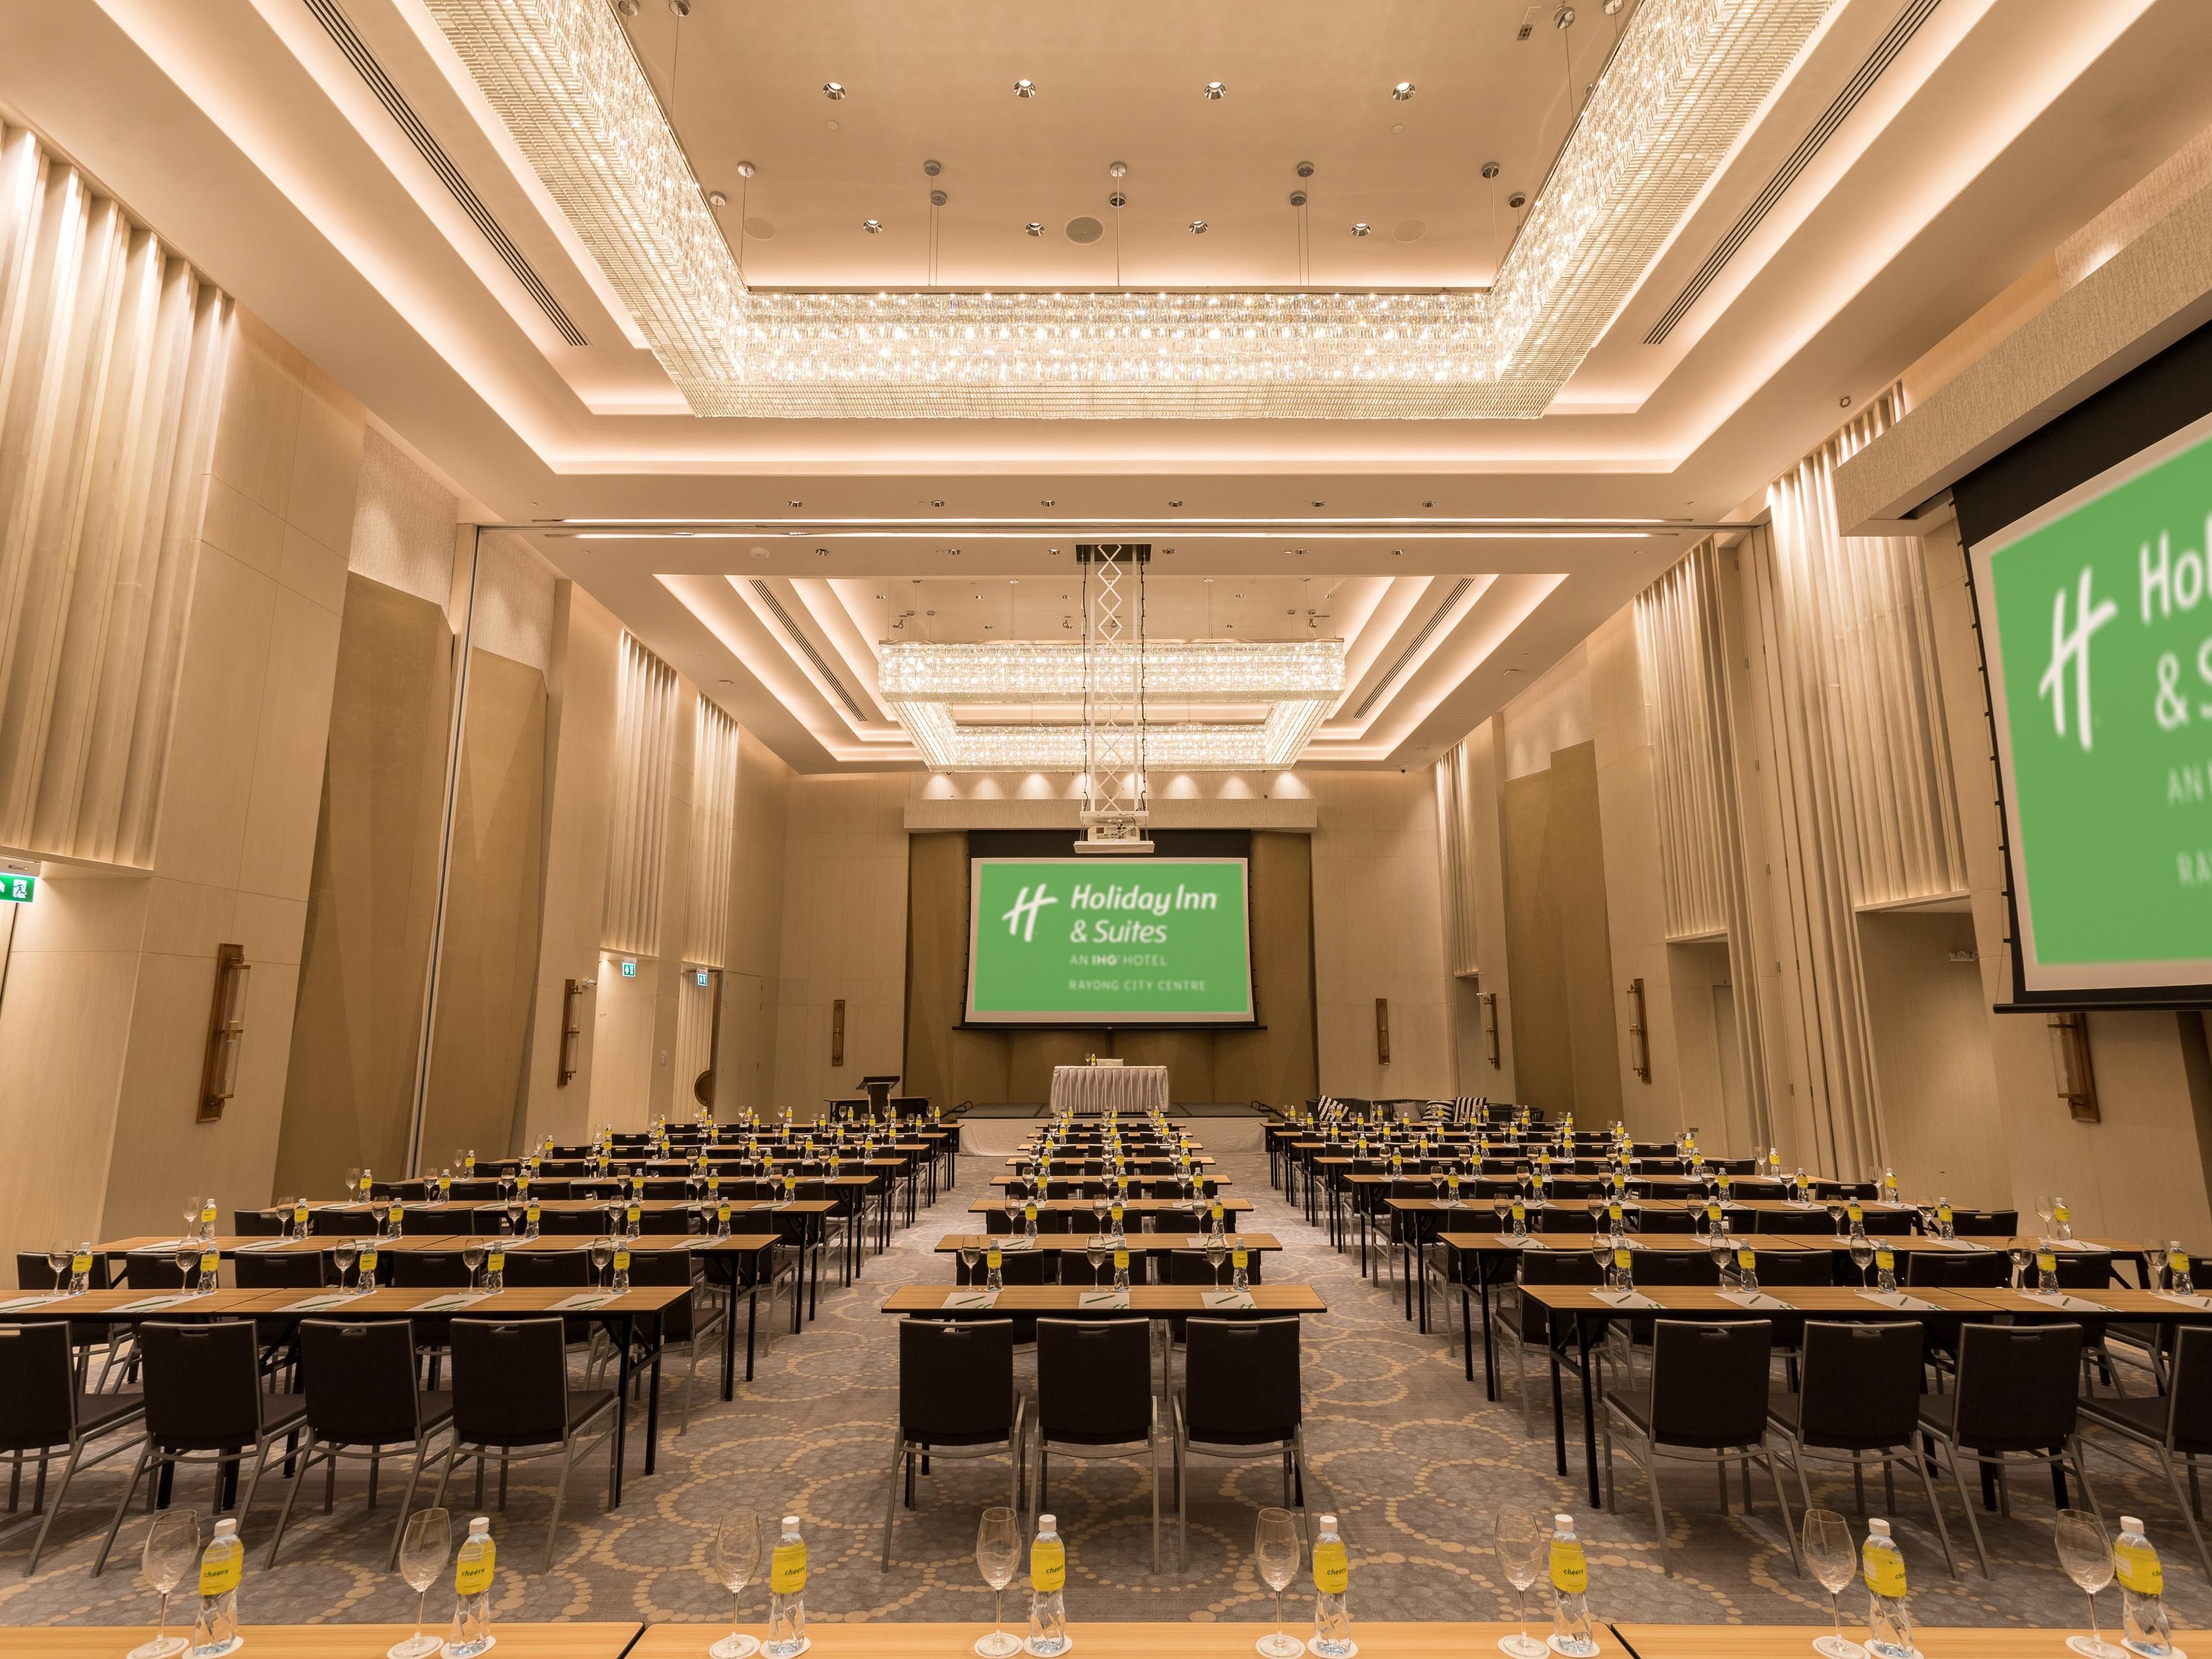 Take advantage of our flexible meeting space spread over 2 levels. From a pillarless Grand Ballroom to smaller meeting rooms and board rooms, we have the perfect space for your meetings and ideas. Complemented with a professional Events team and state of the art technology, all our guests are assured of a successful event at our hotel.